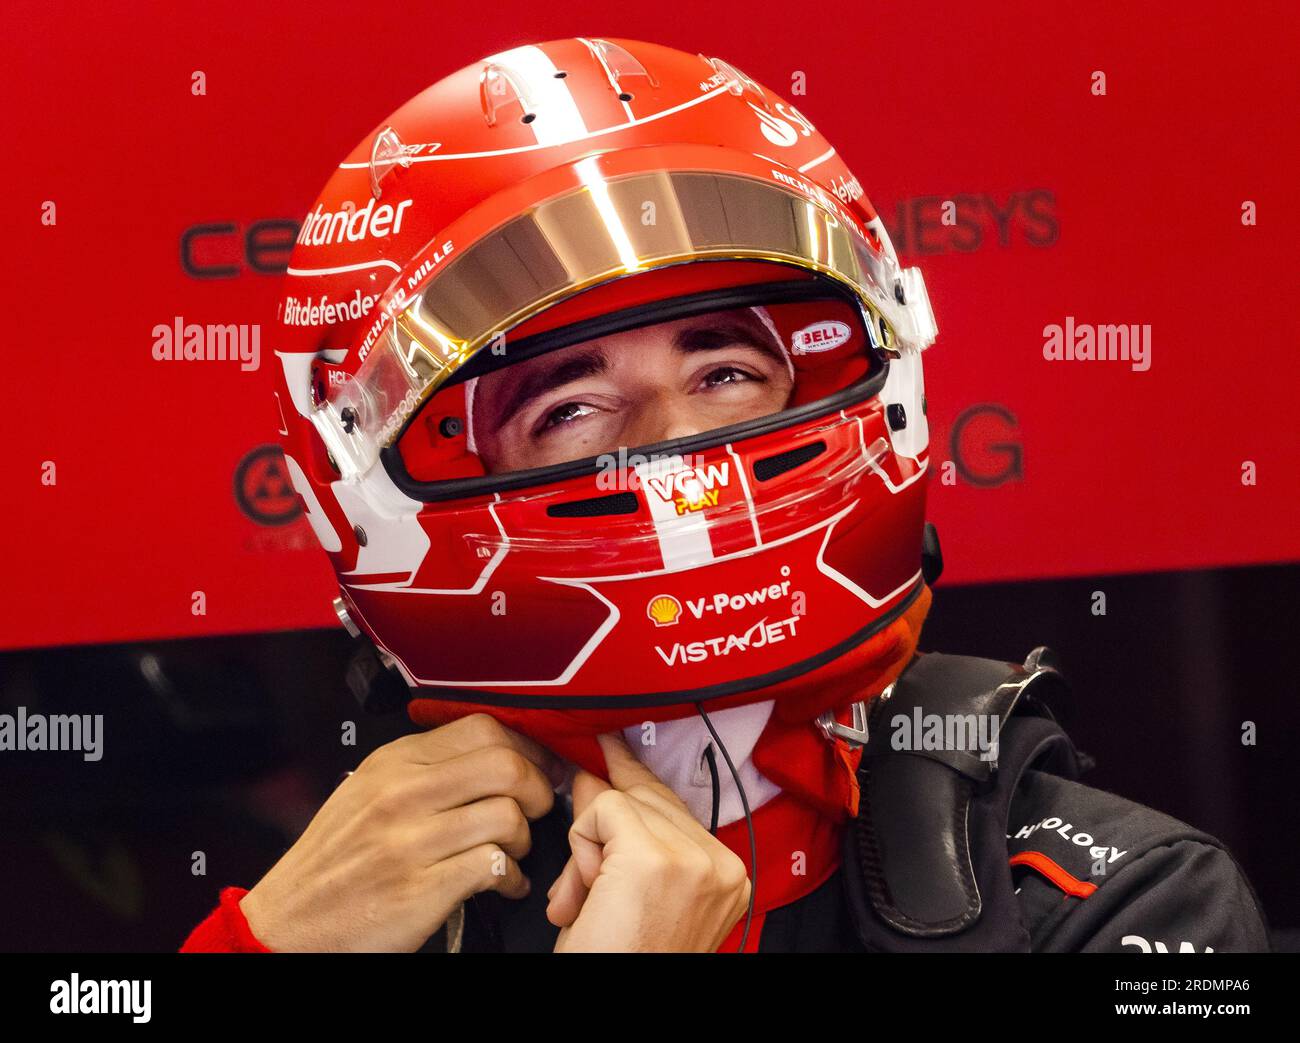 Budapest, Hungary. 22nd July 2023. BUDAPEST - Charles Leclerc (Ferrari) during qualifying on the Hungaroring Circuit ahead of the Hungarian Grand Prix. ANP REMKO DE WAAL Credit: ANP/Alamy Live News Stock Photo